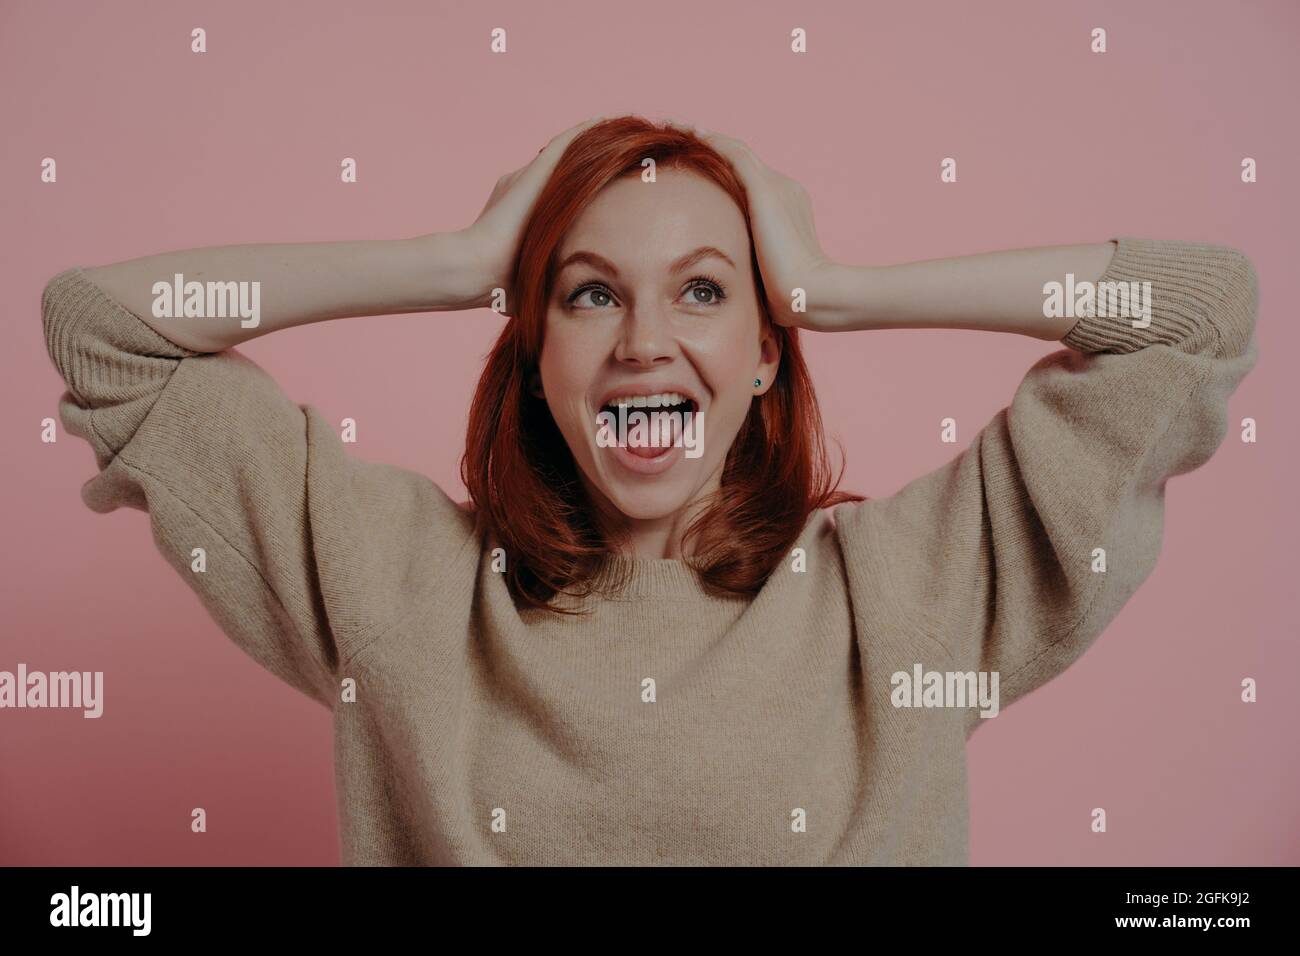 Surprised shocked european female holding head in hands and looking upside with excited expression Stock Photo